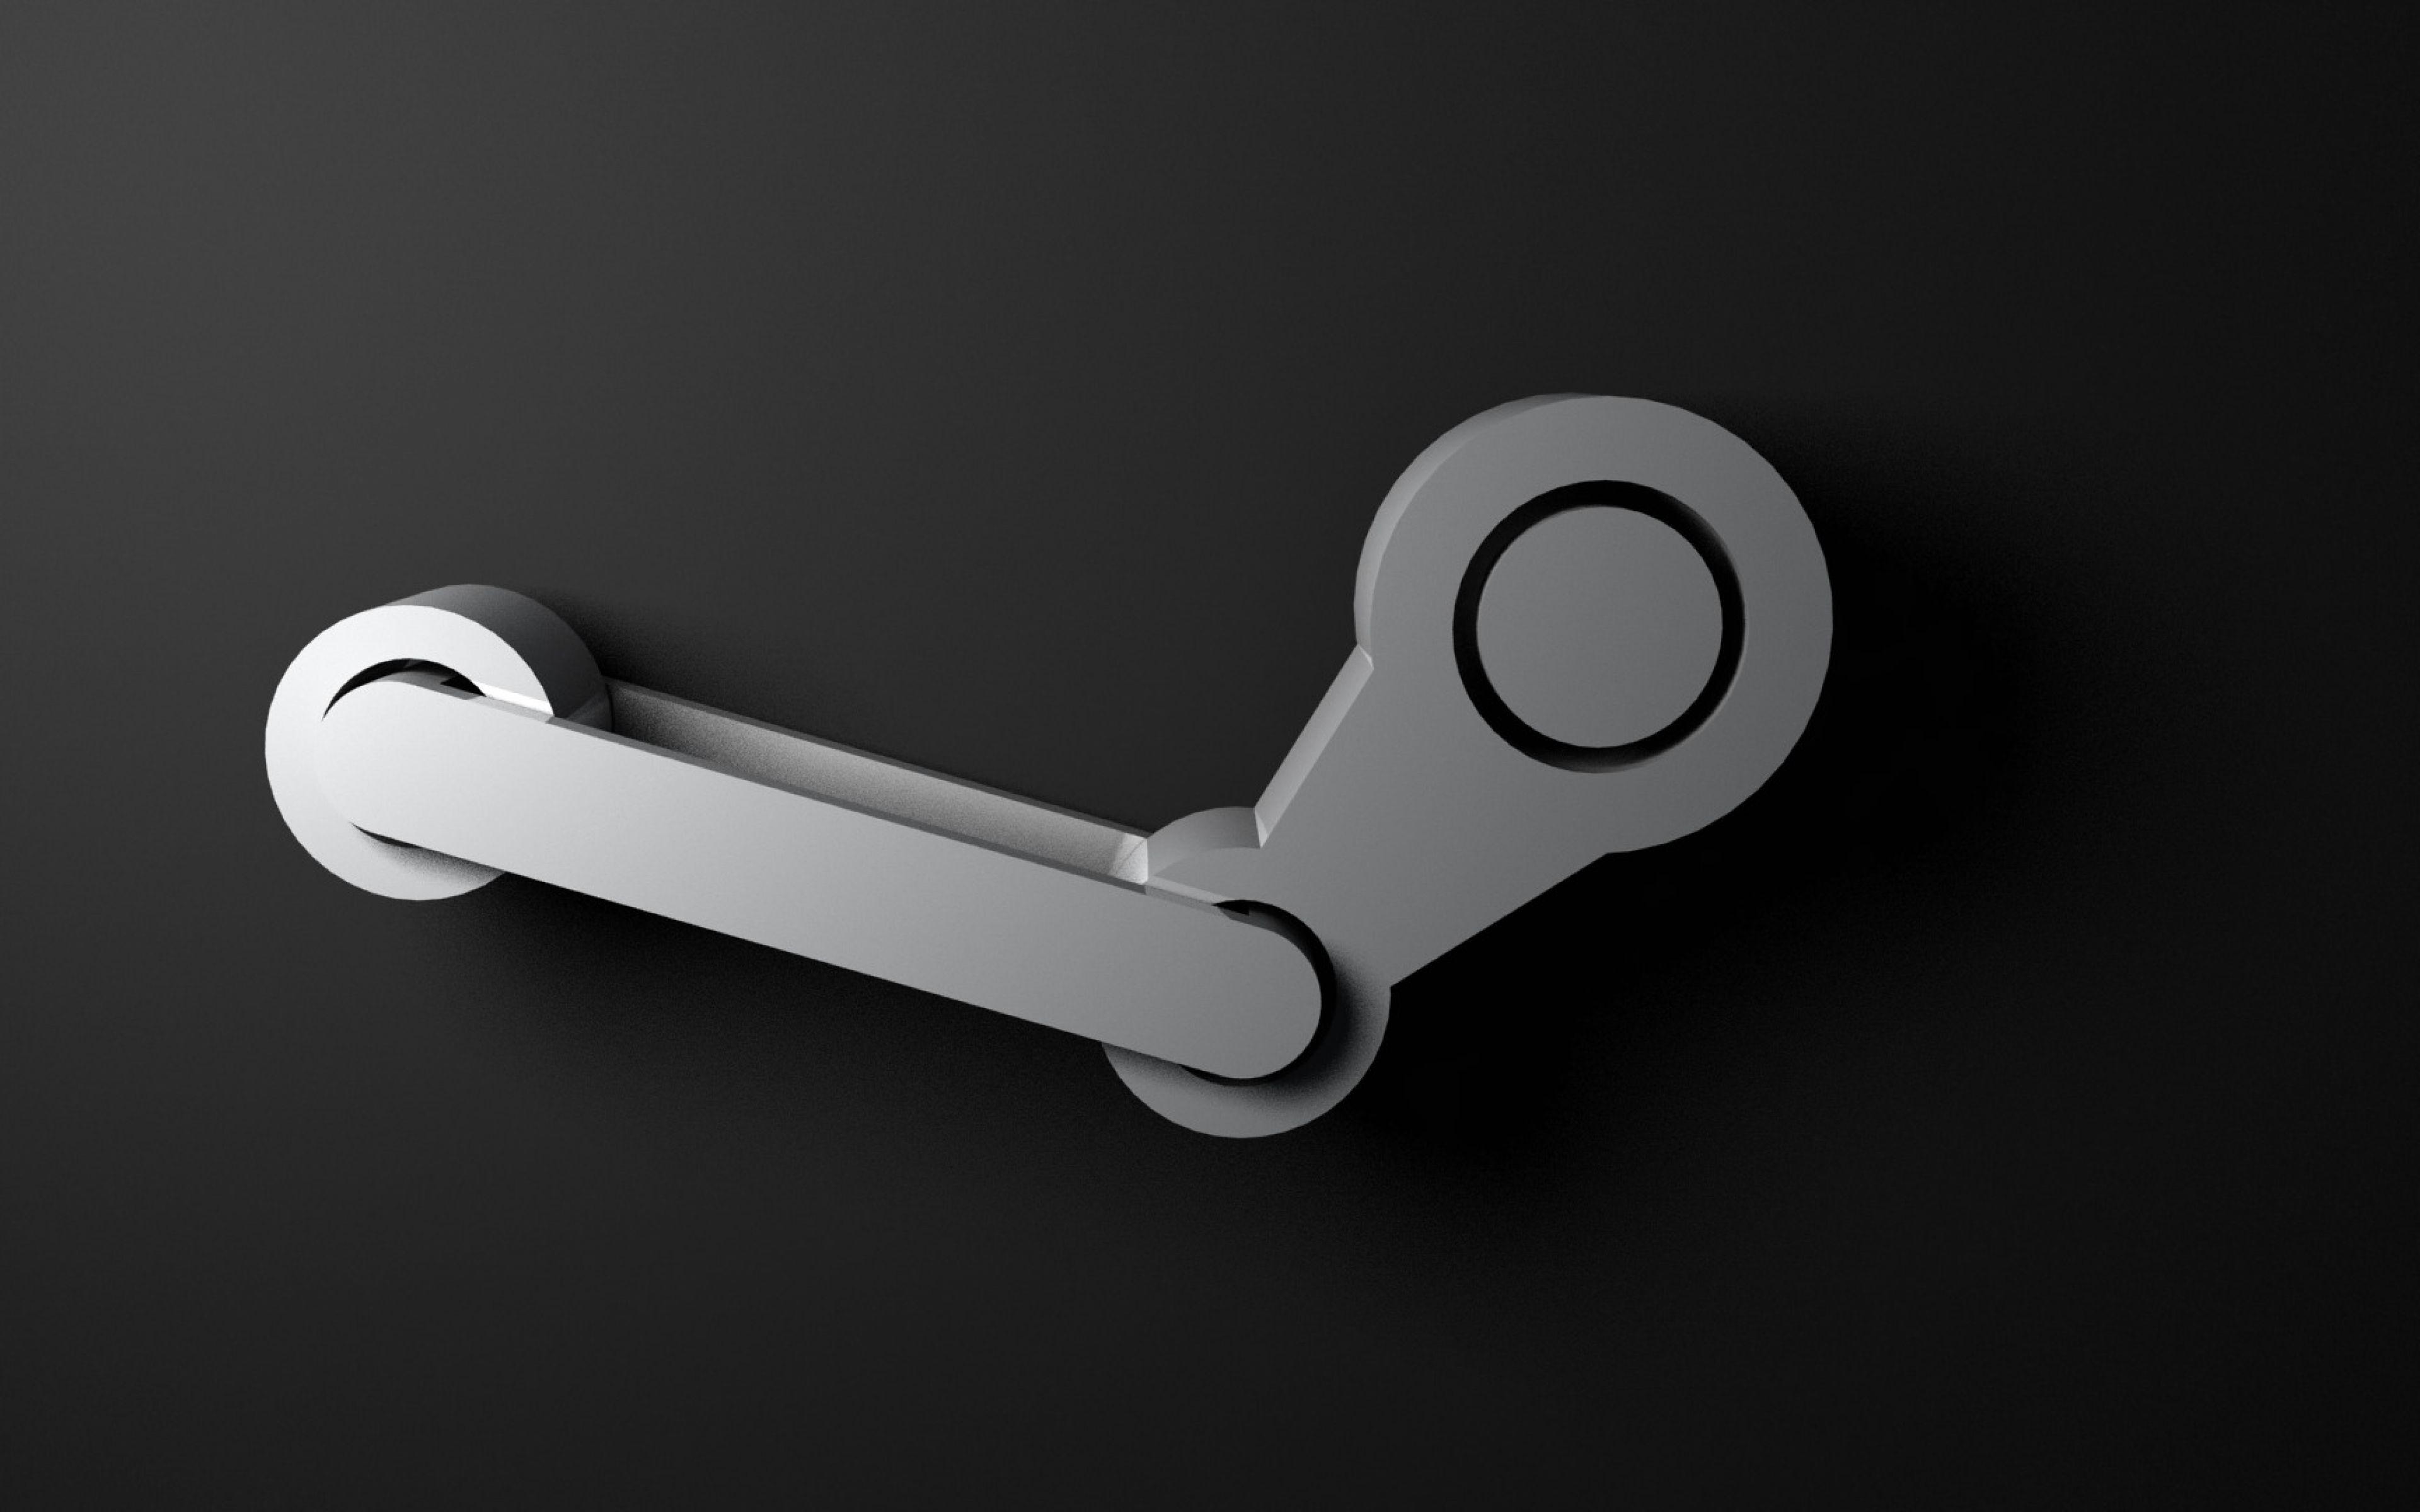 50+ Steam HD Wallpapers and Backgrounds